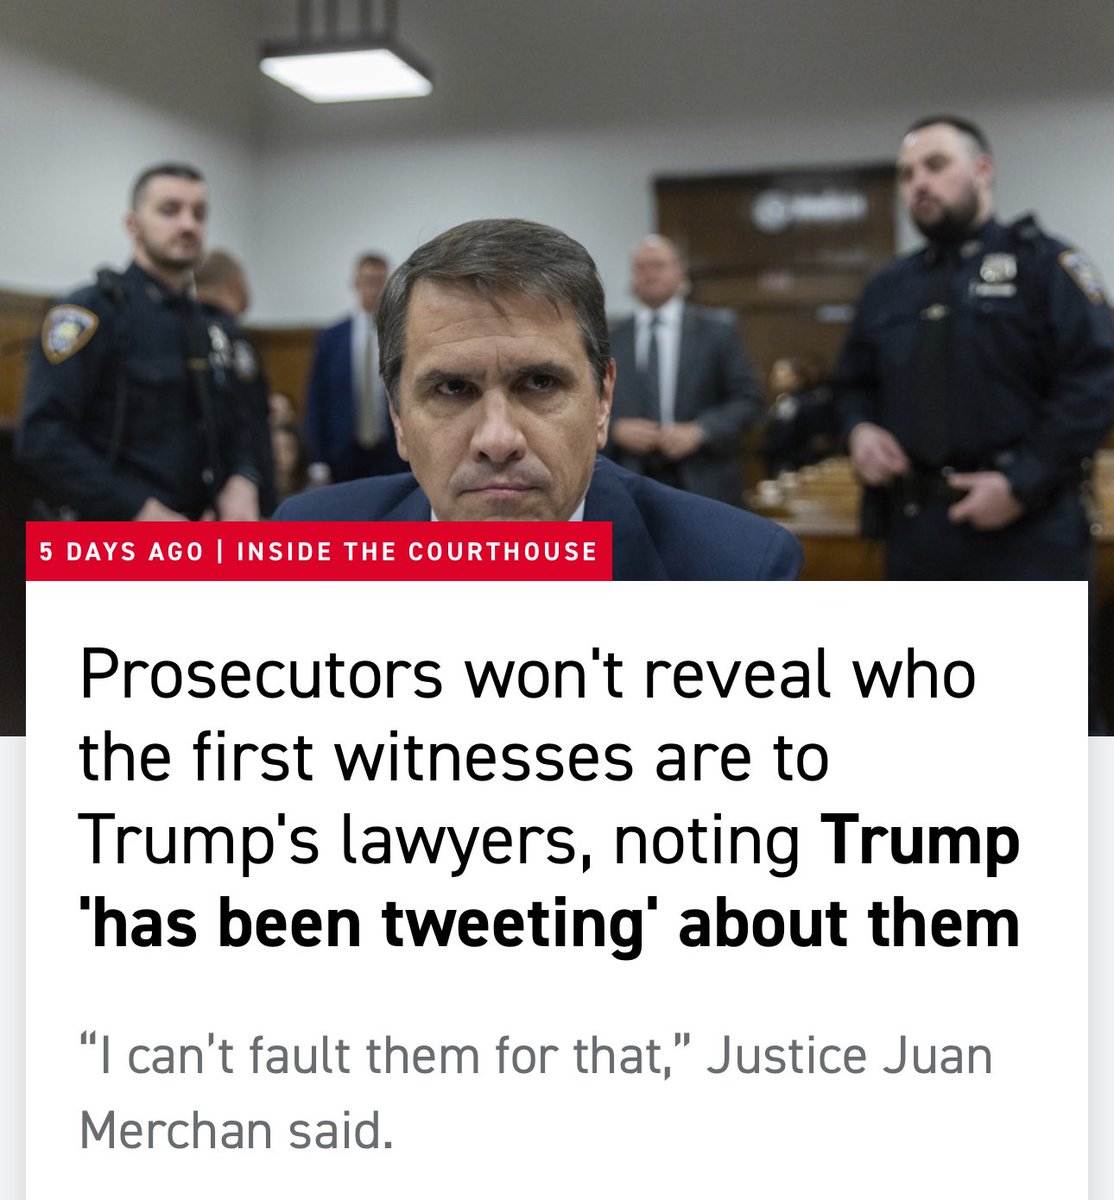 Prosecutors say Trump tweeting about witnesses violates gag order—but he wasn't allowed to know who they were.